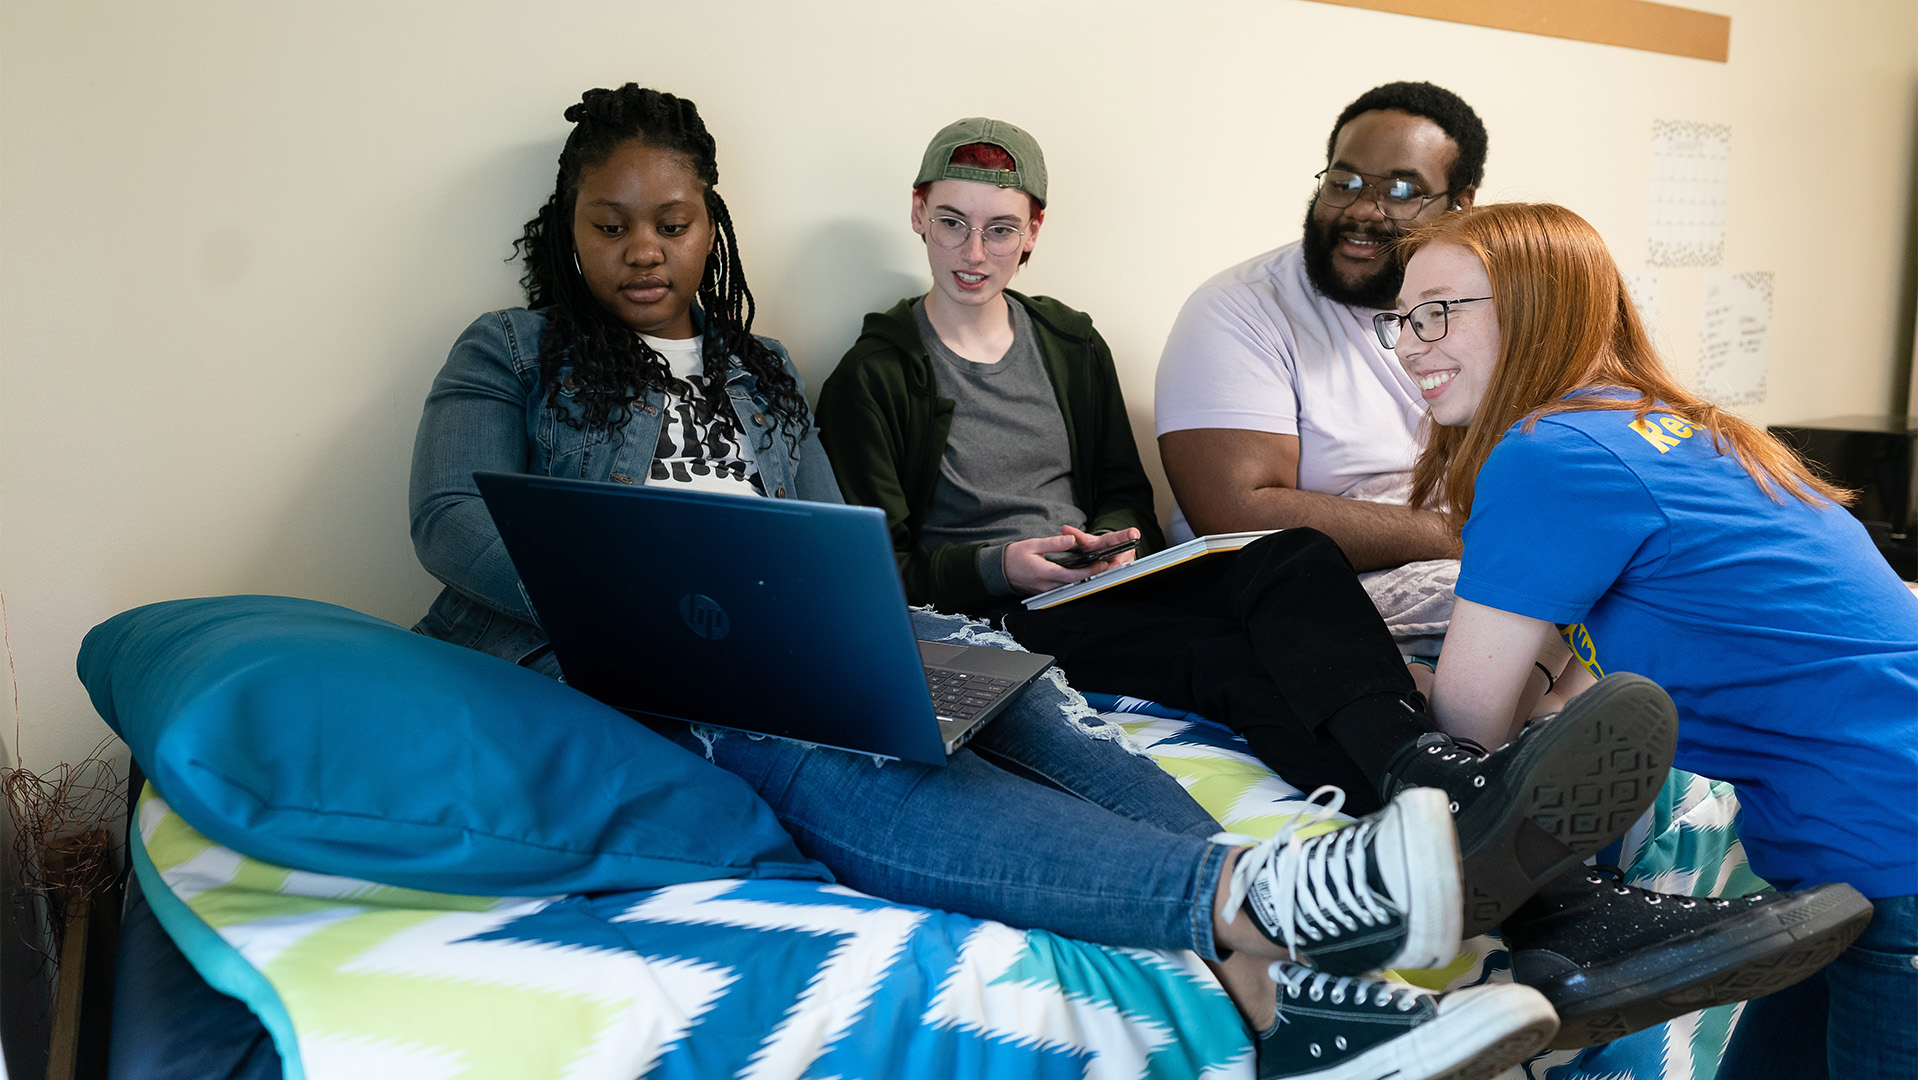 Students in a dorm on Charlotte campus